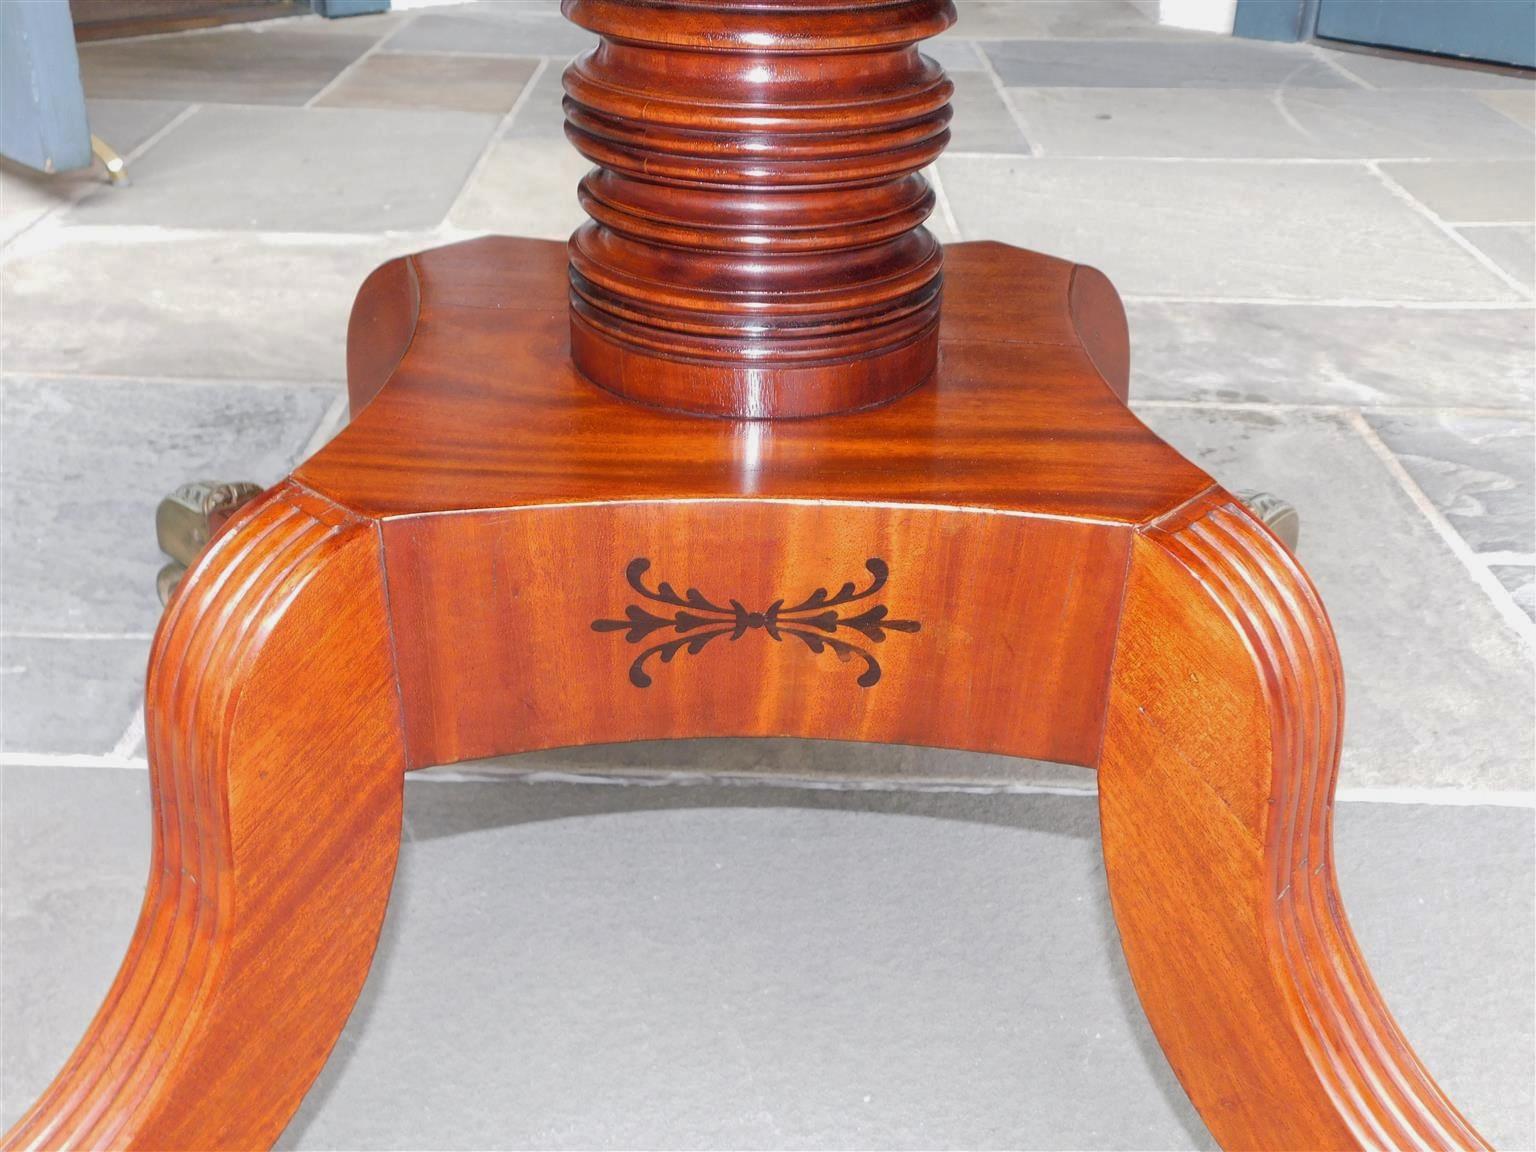 English Regency Mahogany Leather Top Ebony Inlaid Rent Table, Circa 1790 For Sale 5